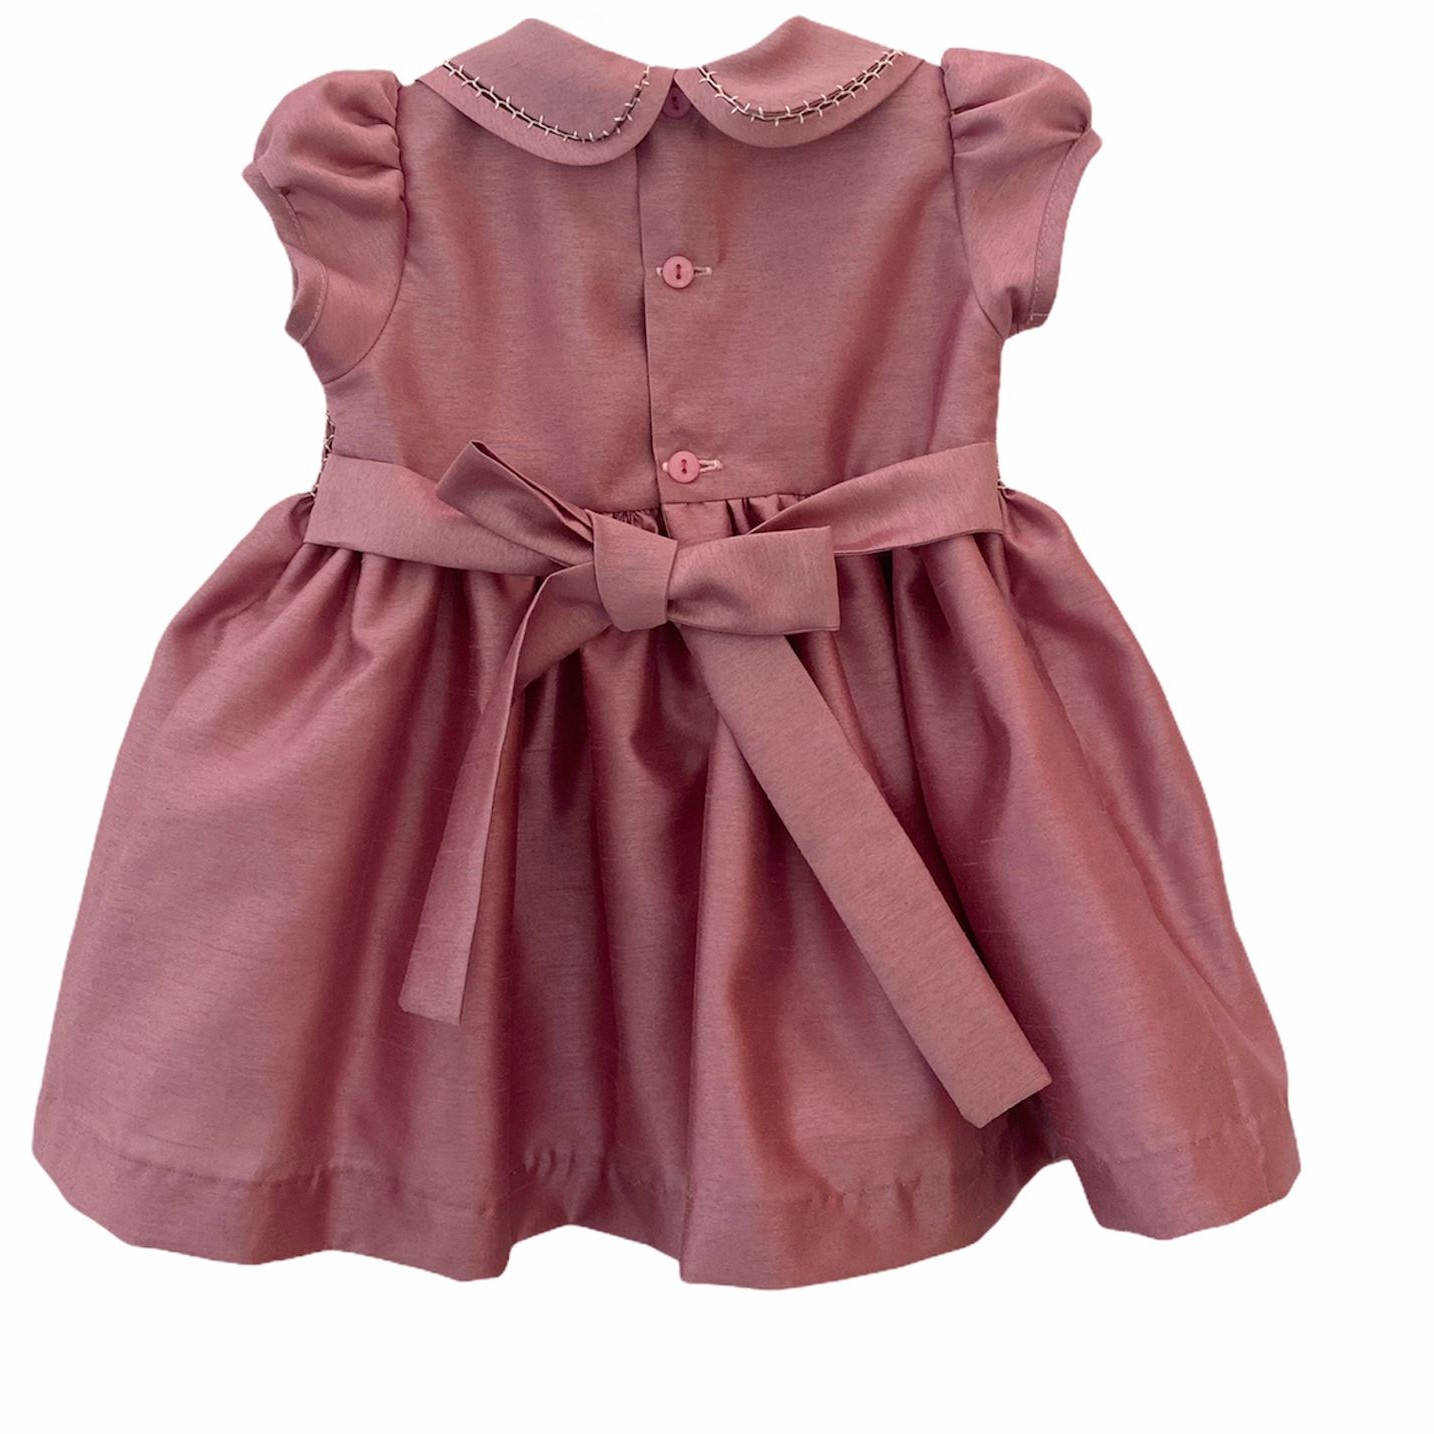 Girl's Dress with Hand Embroidery - Pink Color with Buttons and Bow at the Waist